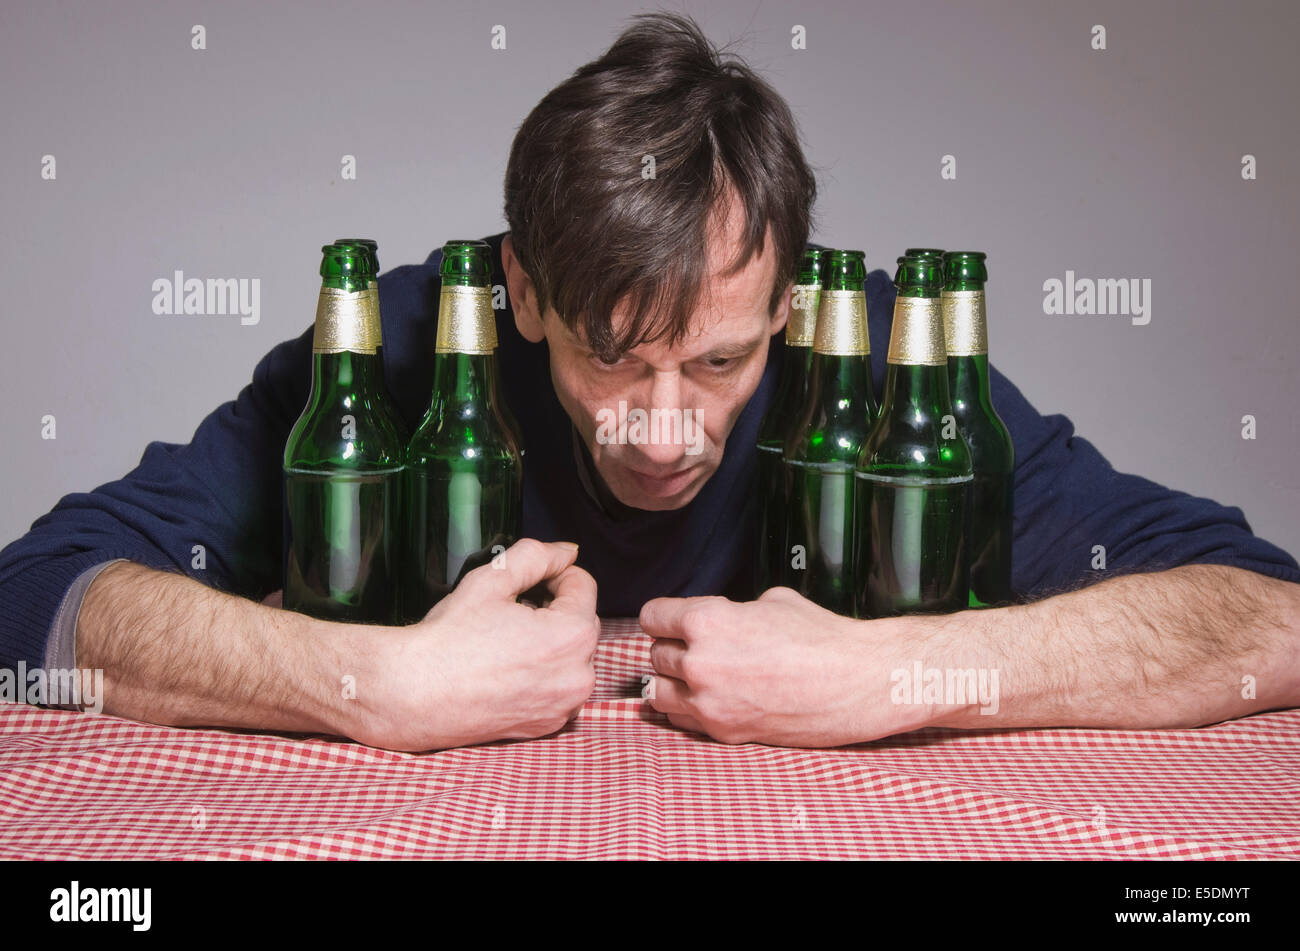 Man at table surrounded by beer bottles Stock Photo